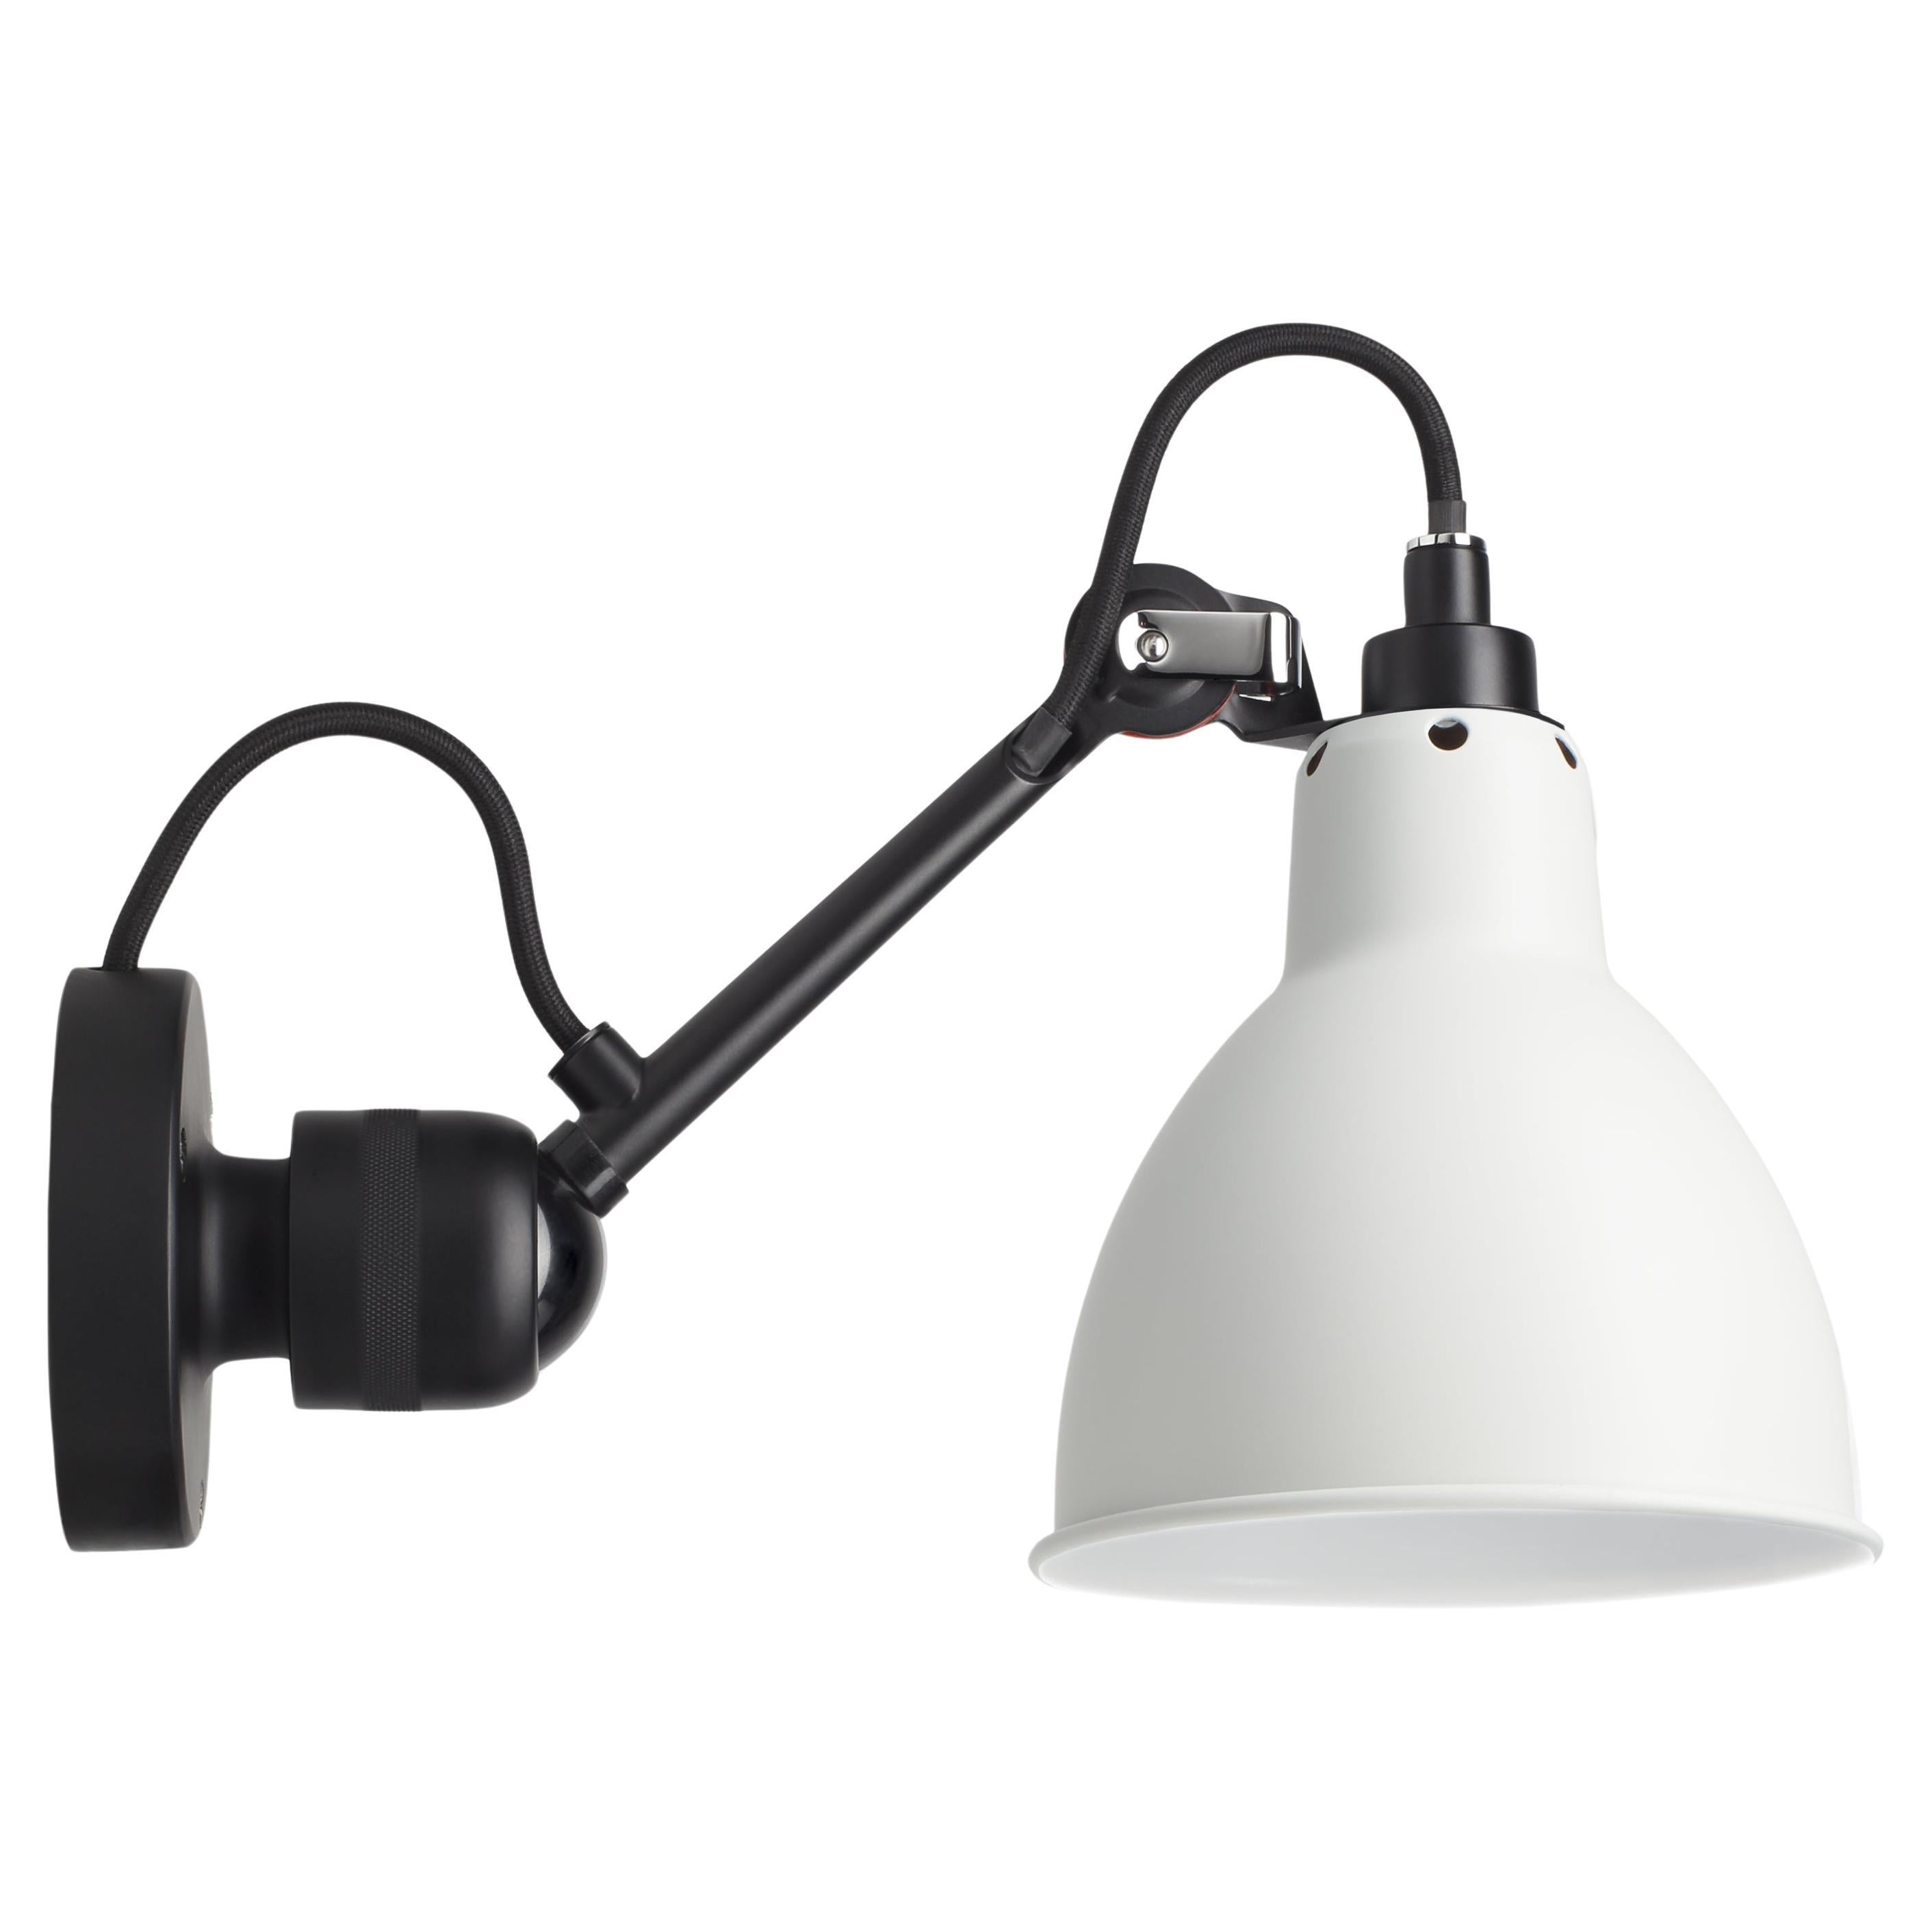 DCW Editions La Lampe Gras N°304 Wall Lamp in Black Arm and White Shade For Sale